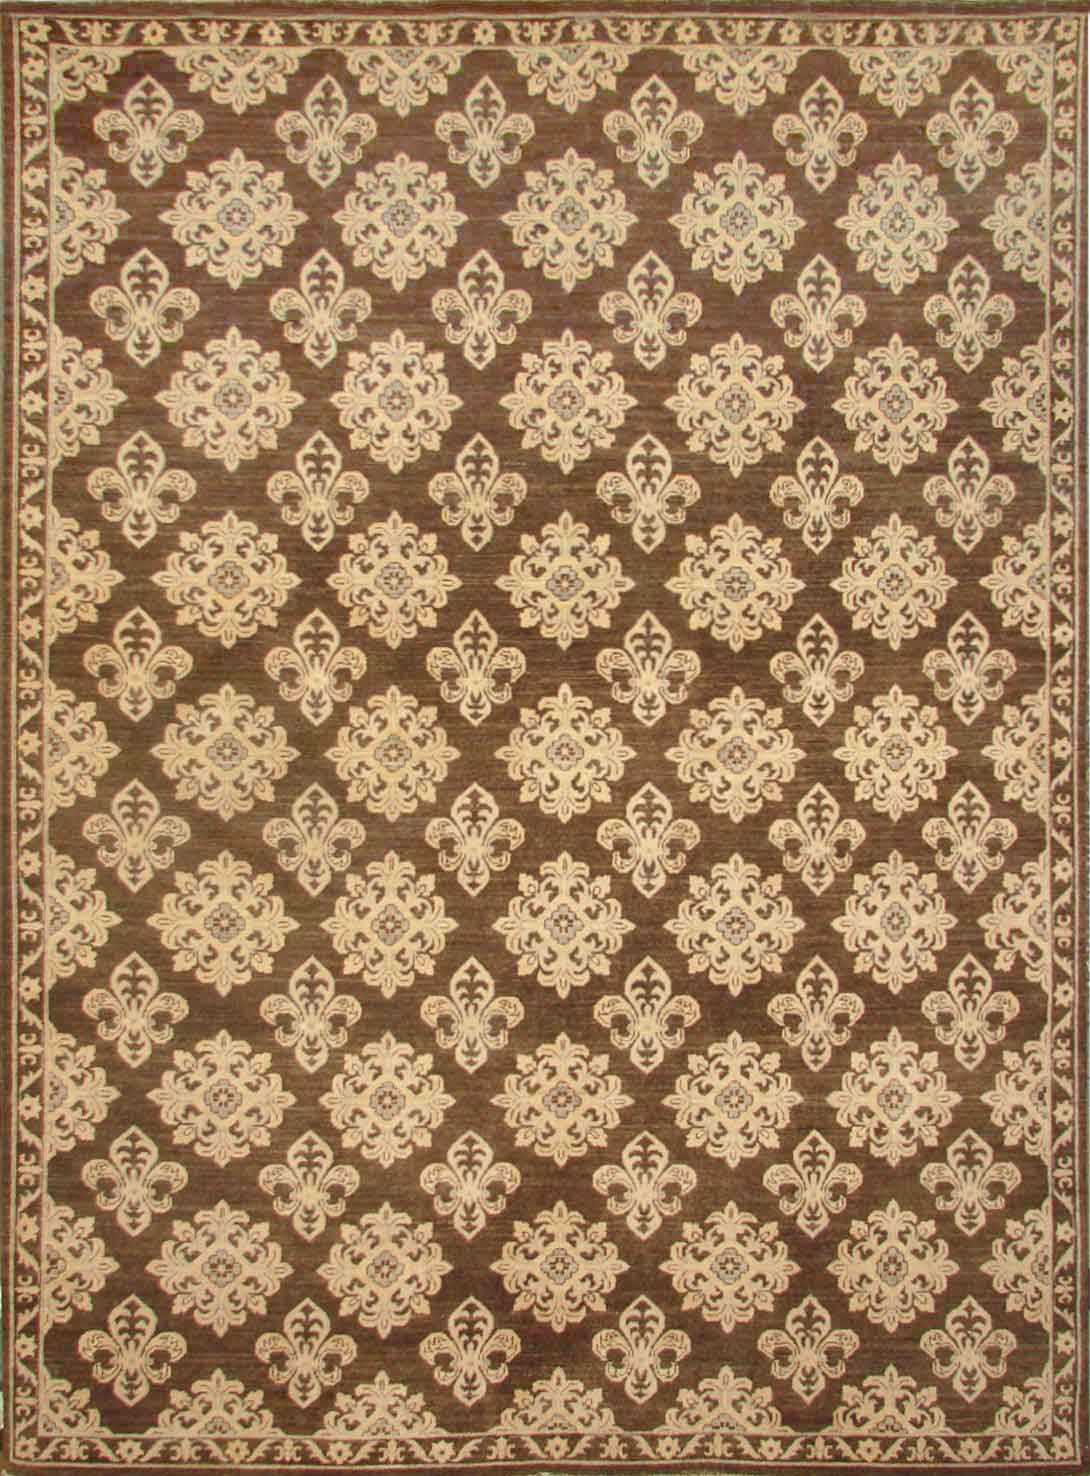 Transitional & Casual Rugs CHOBI 9960 Lt. Brown - Chocolate & Ivory - Beige Hand Knotted Rug